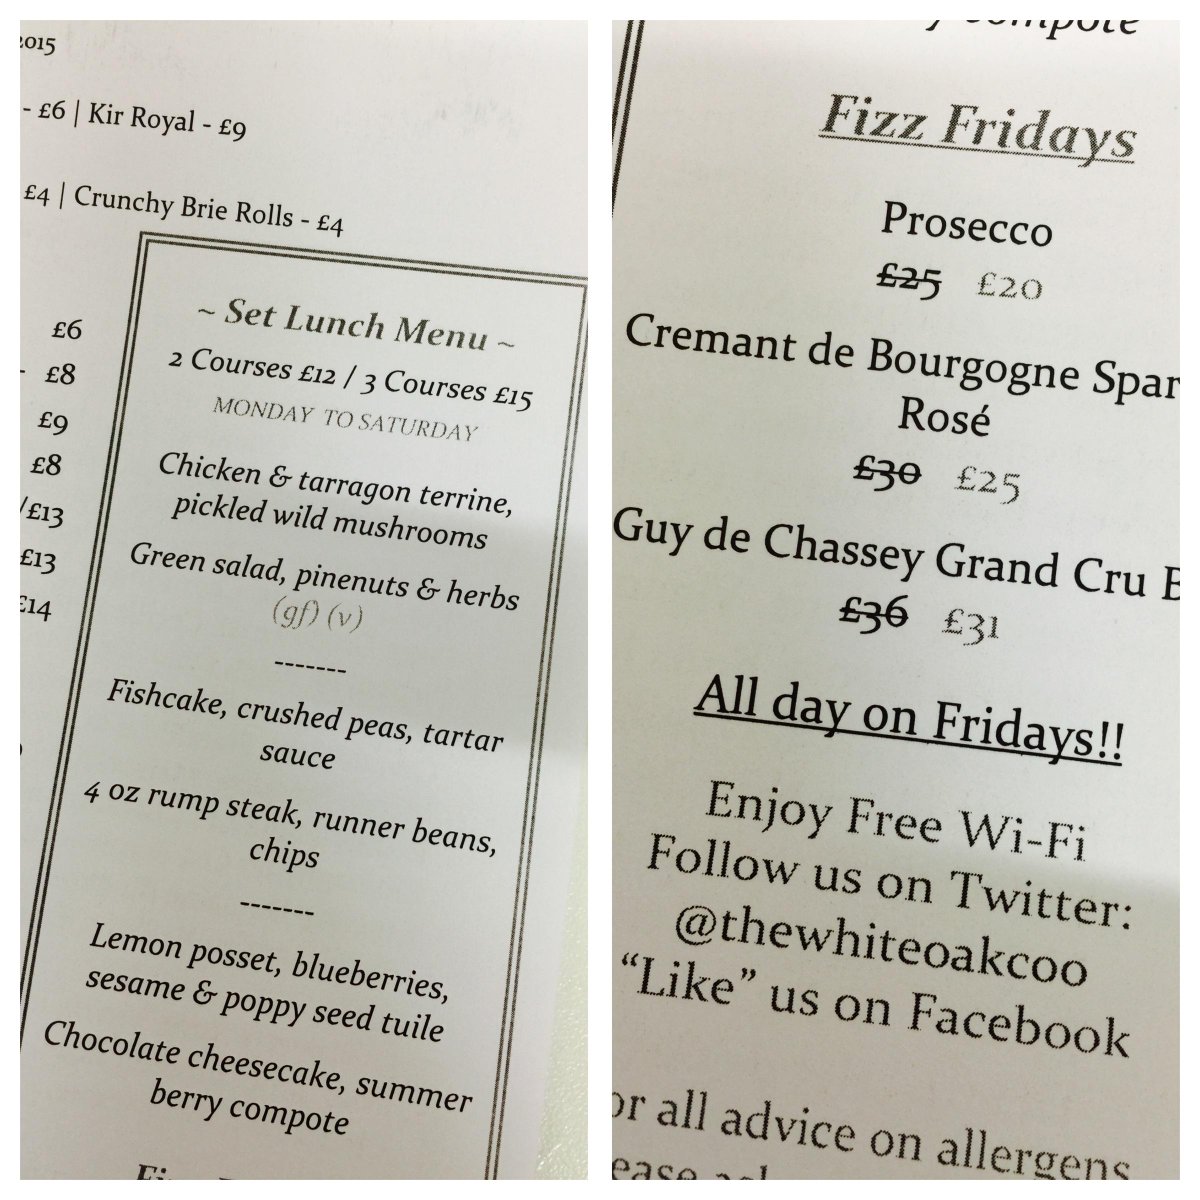 very tasty looking set lunch menu & dont forget its FIZZ FRIDAY! #amazinglunch #fridayfeeling